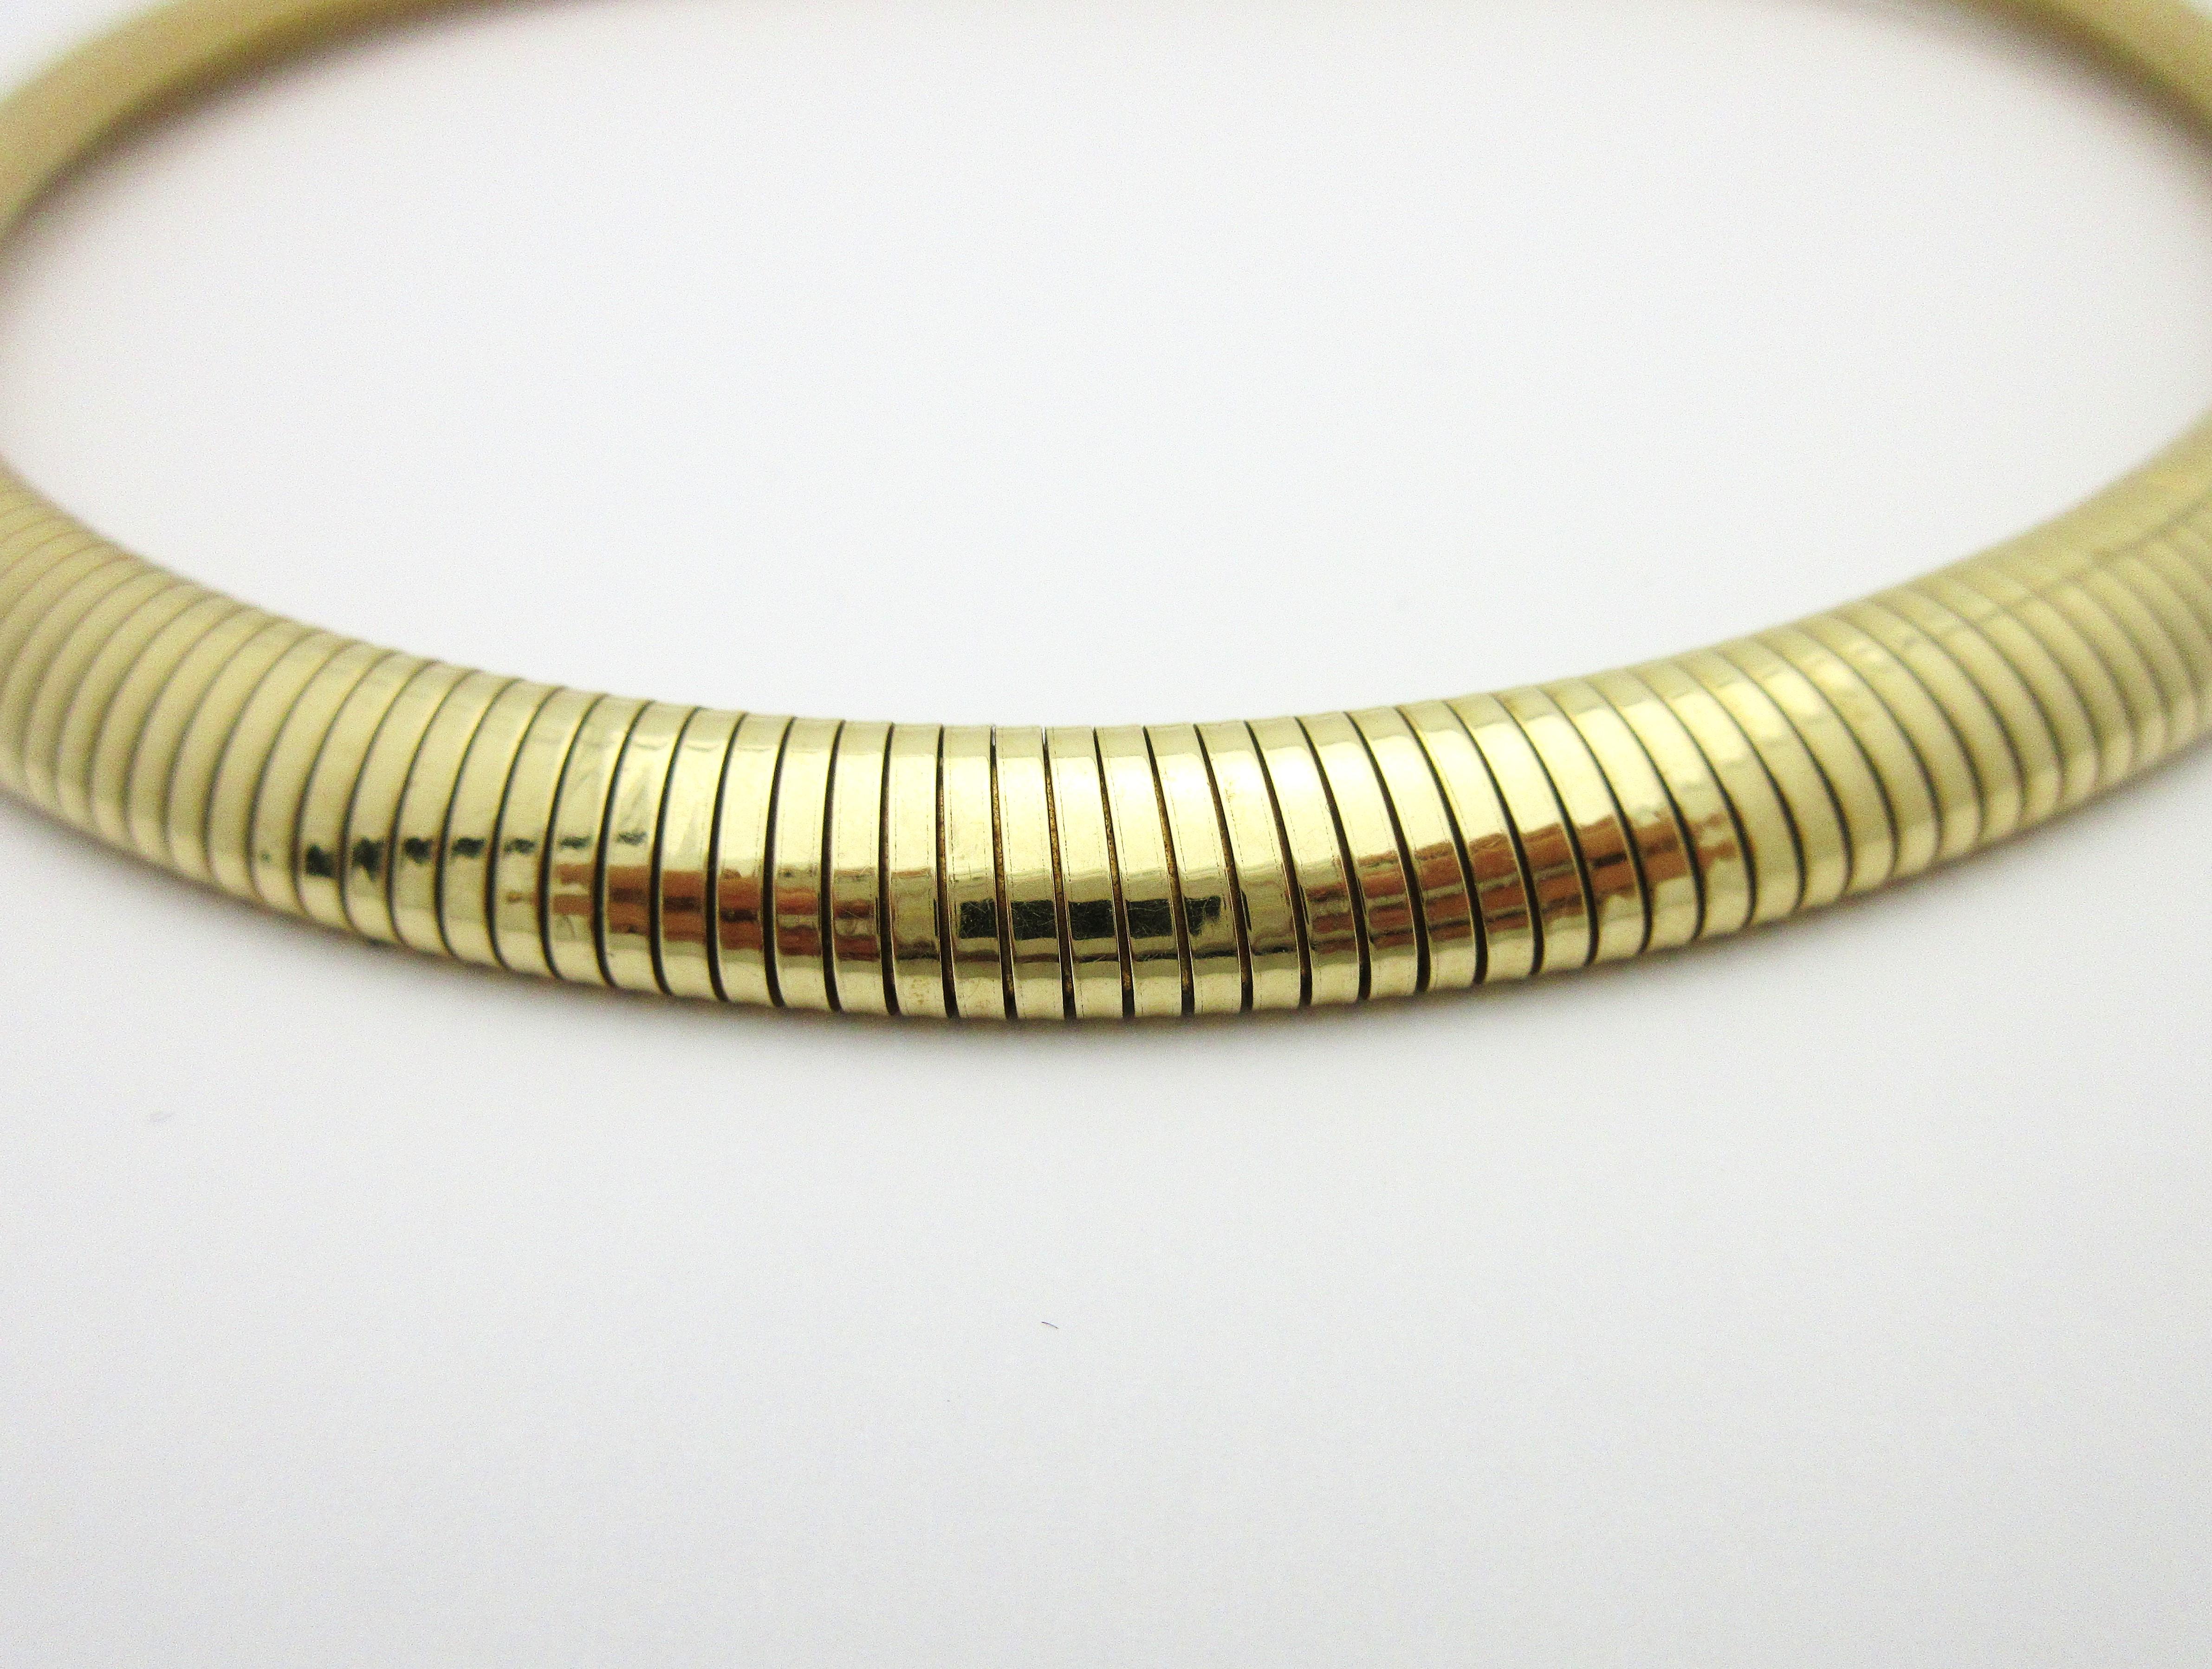 This fabulous retro necklace circa 1940s is a classic and rare piece by Forstner.  

The style of the coil is a callback to the types of materials and techniques available during World War II, and is reflected in the design of this 